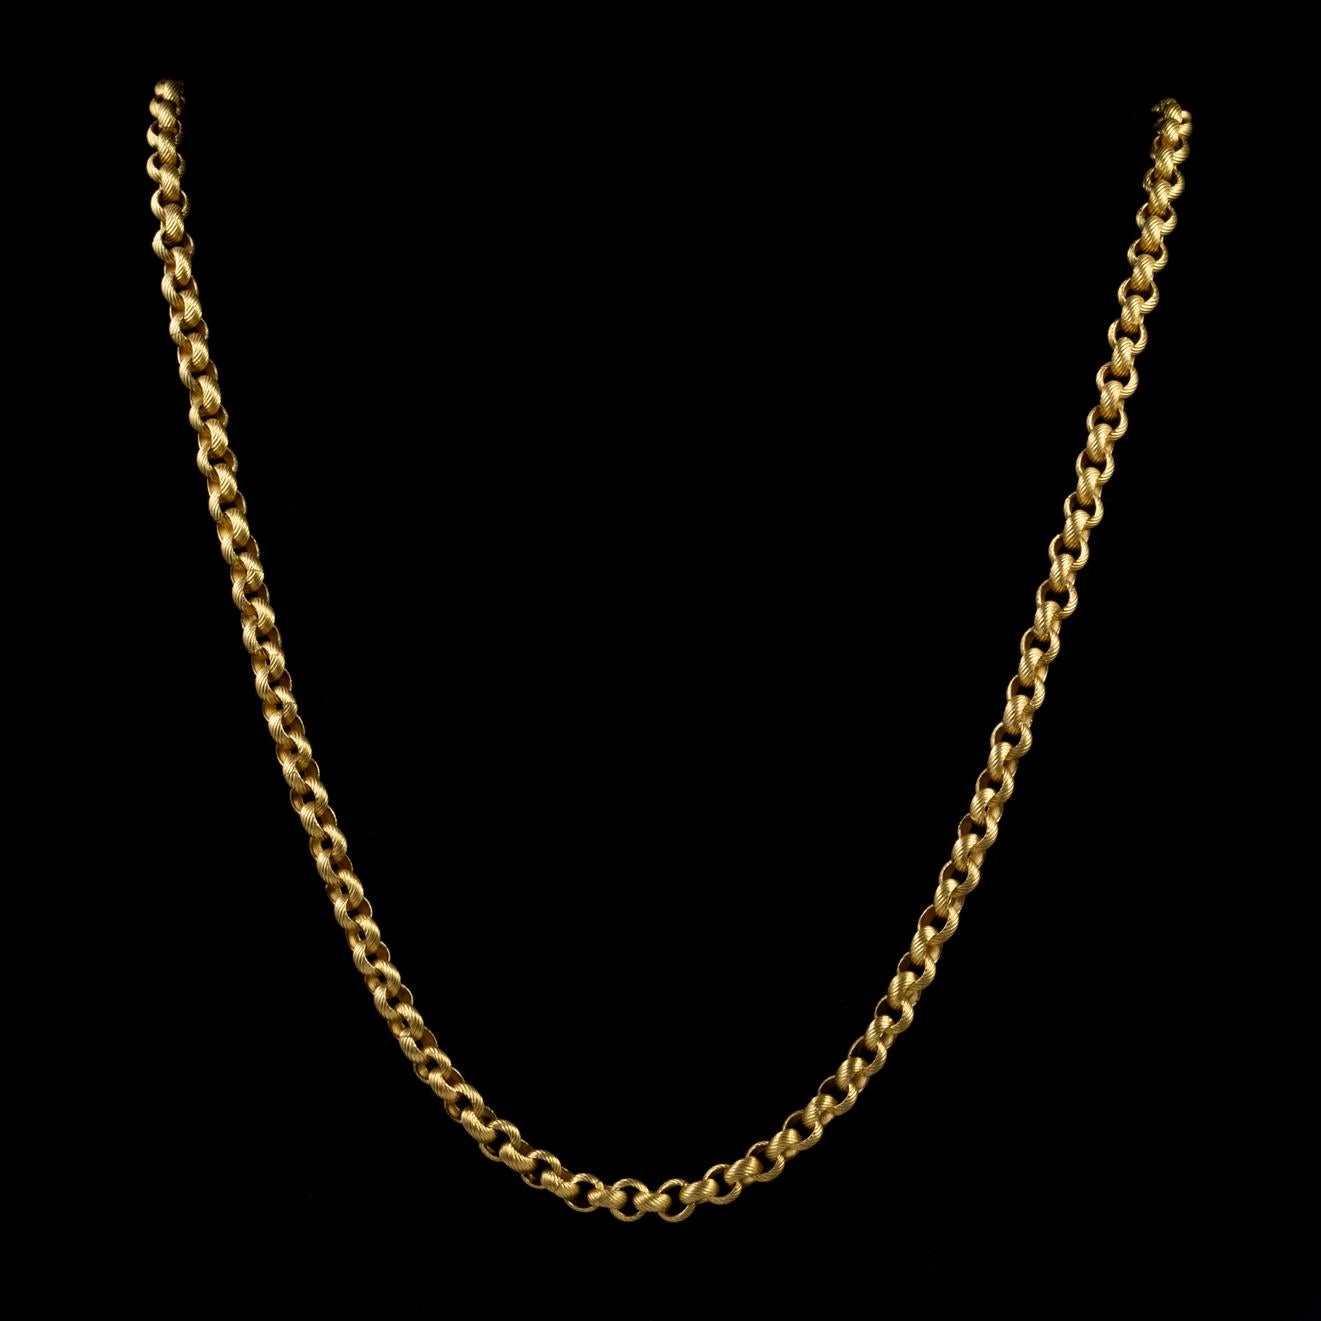 This exquisite long antique guard chain has been beautifully preserved from the Georgian era. The piece is made up of textured links crafted in Silver and gilded in 18ct Yellow Gold. 

The barrel clasp is very striking and has been expertly engraved